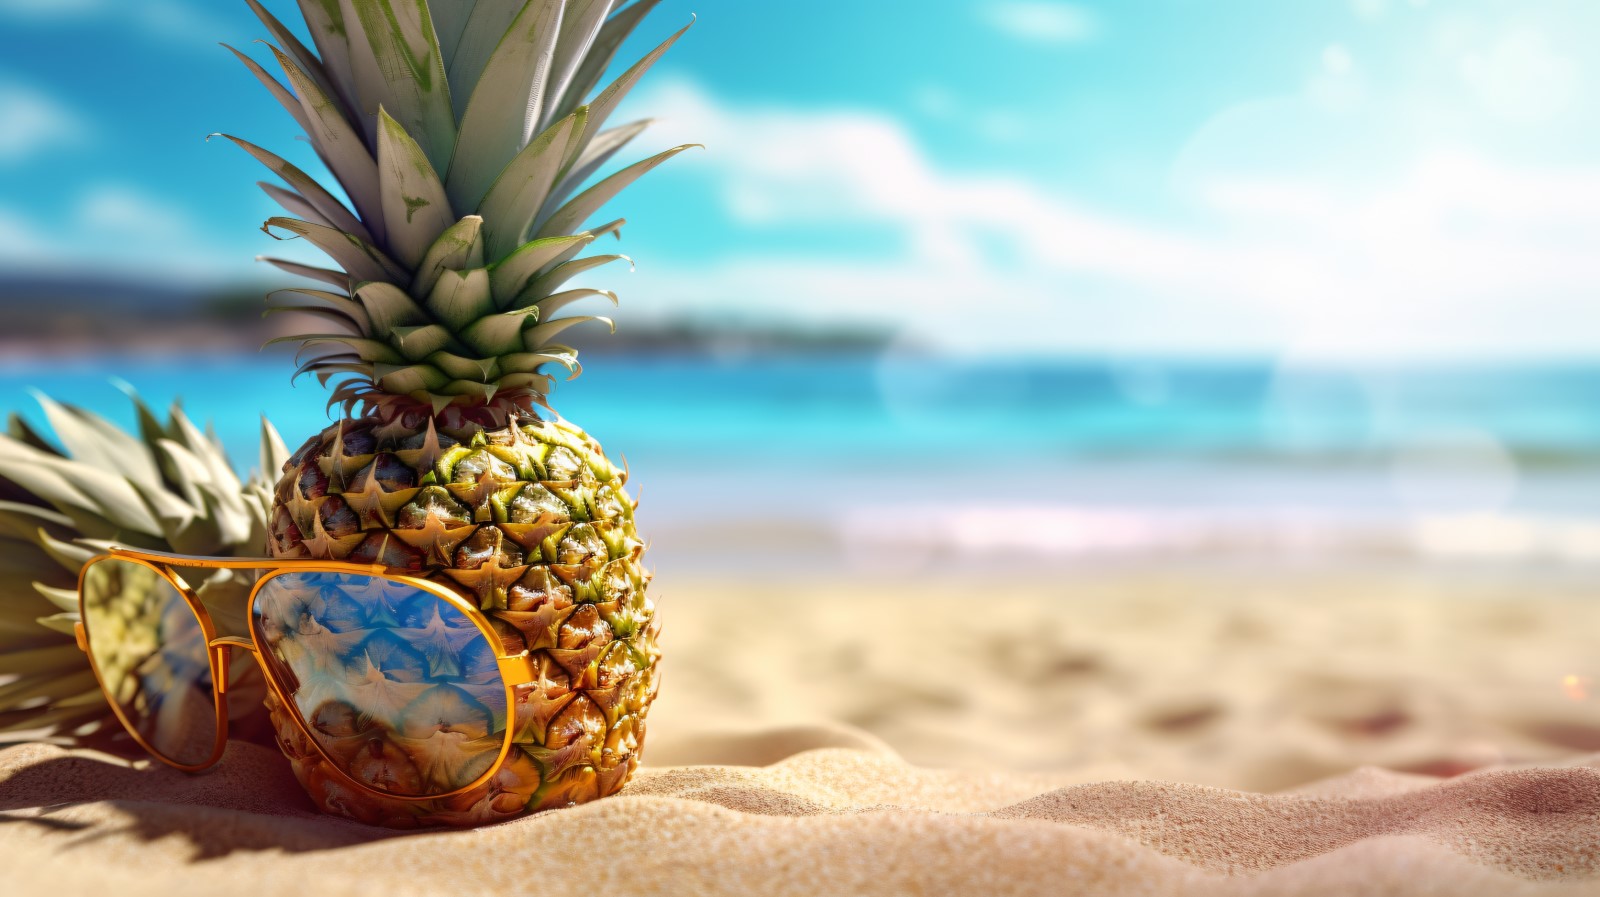 Pineapple drink in cocktail glass and sand beach scene 422